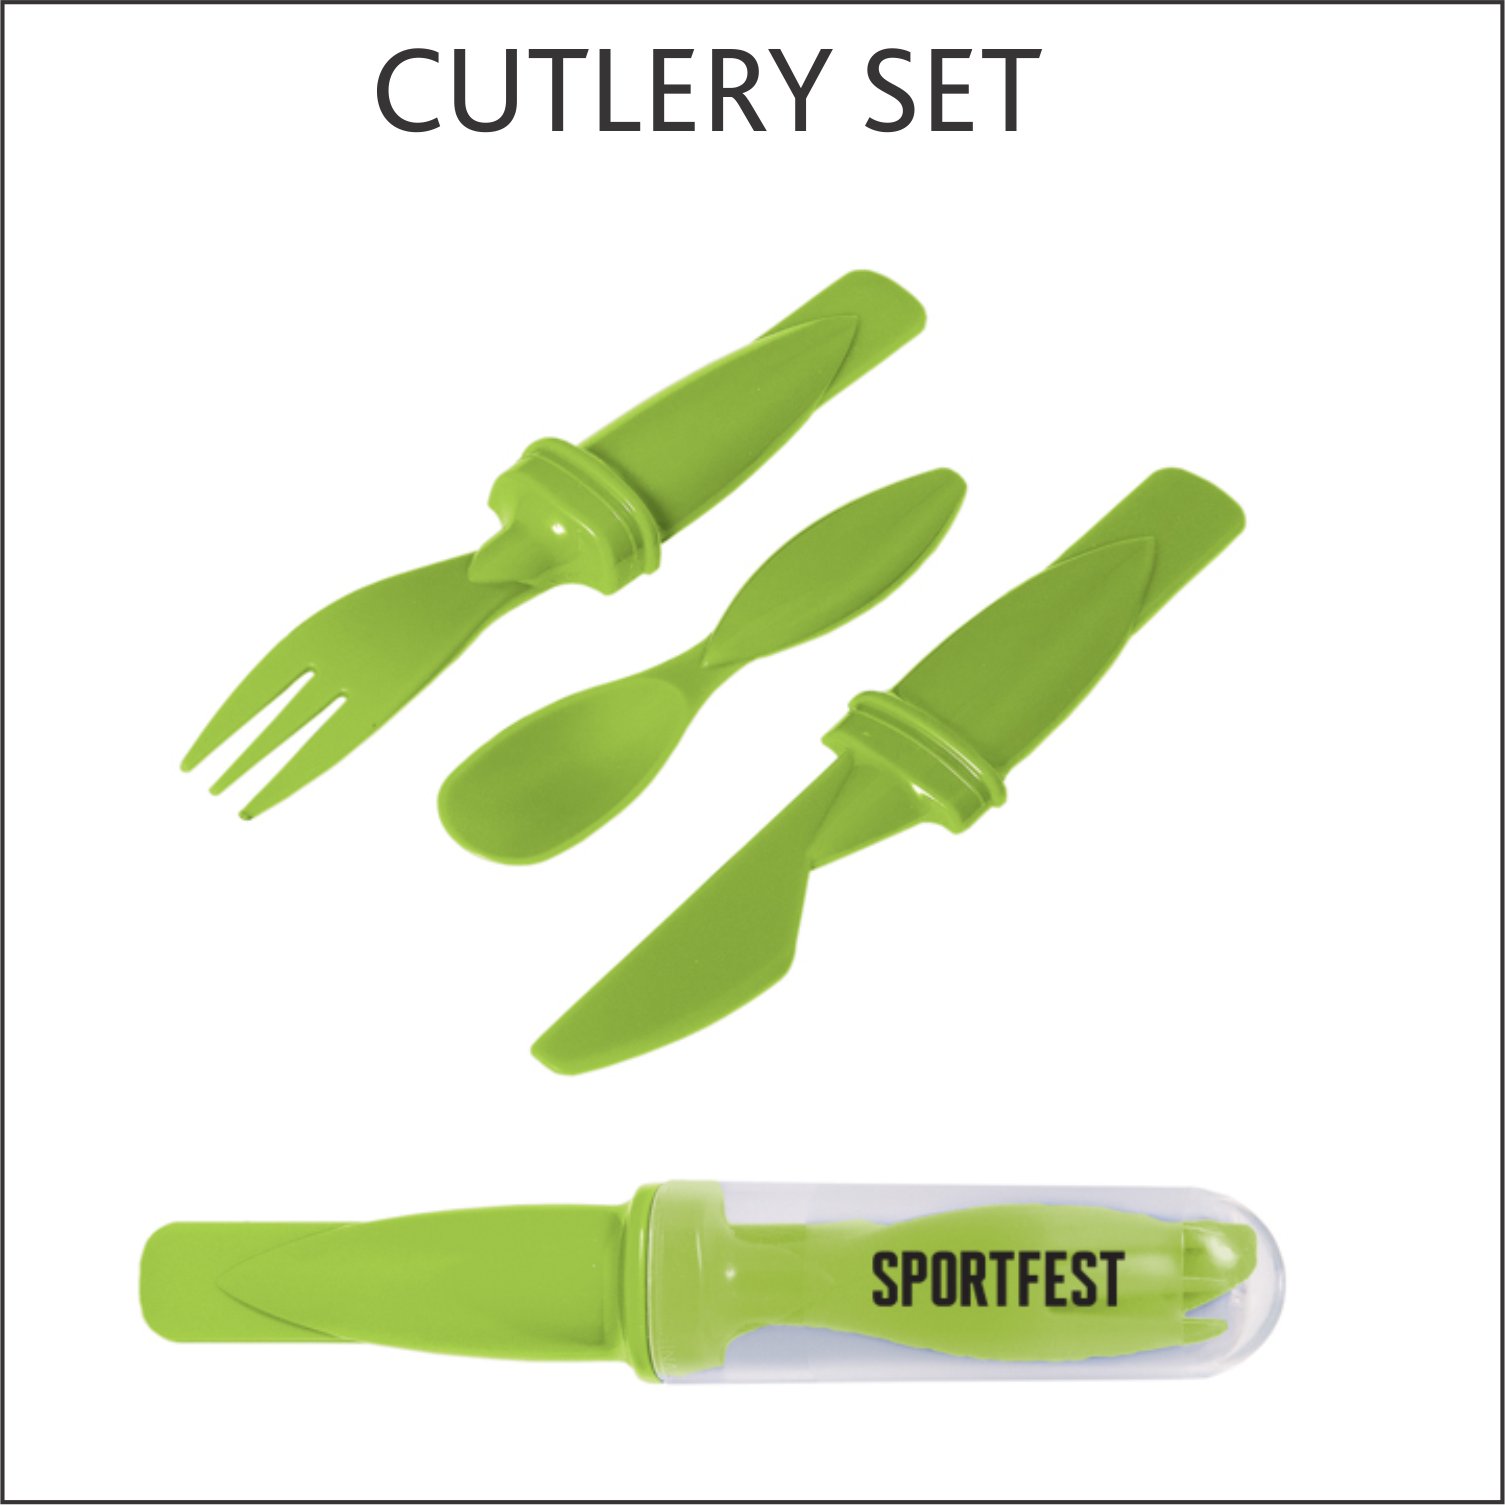 CUTLERY SET.png